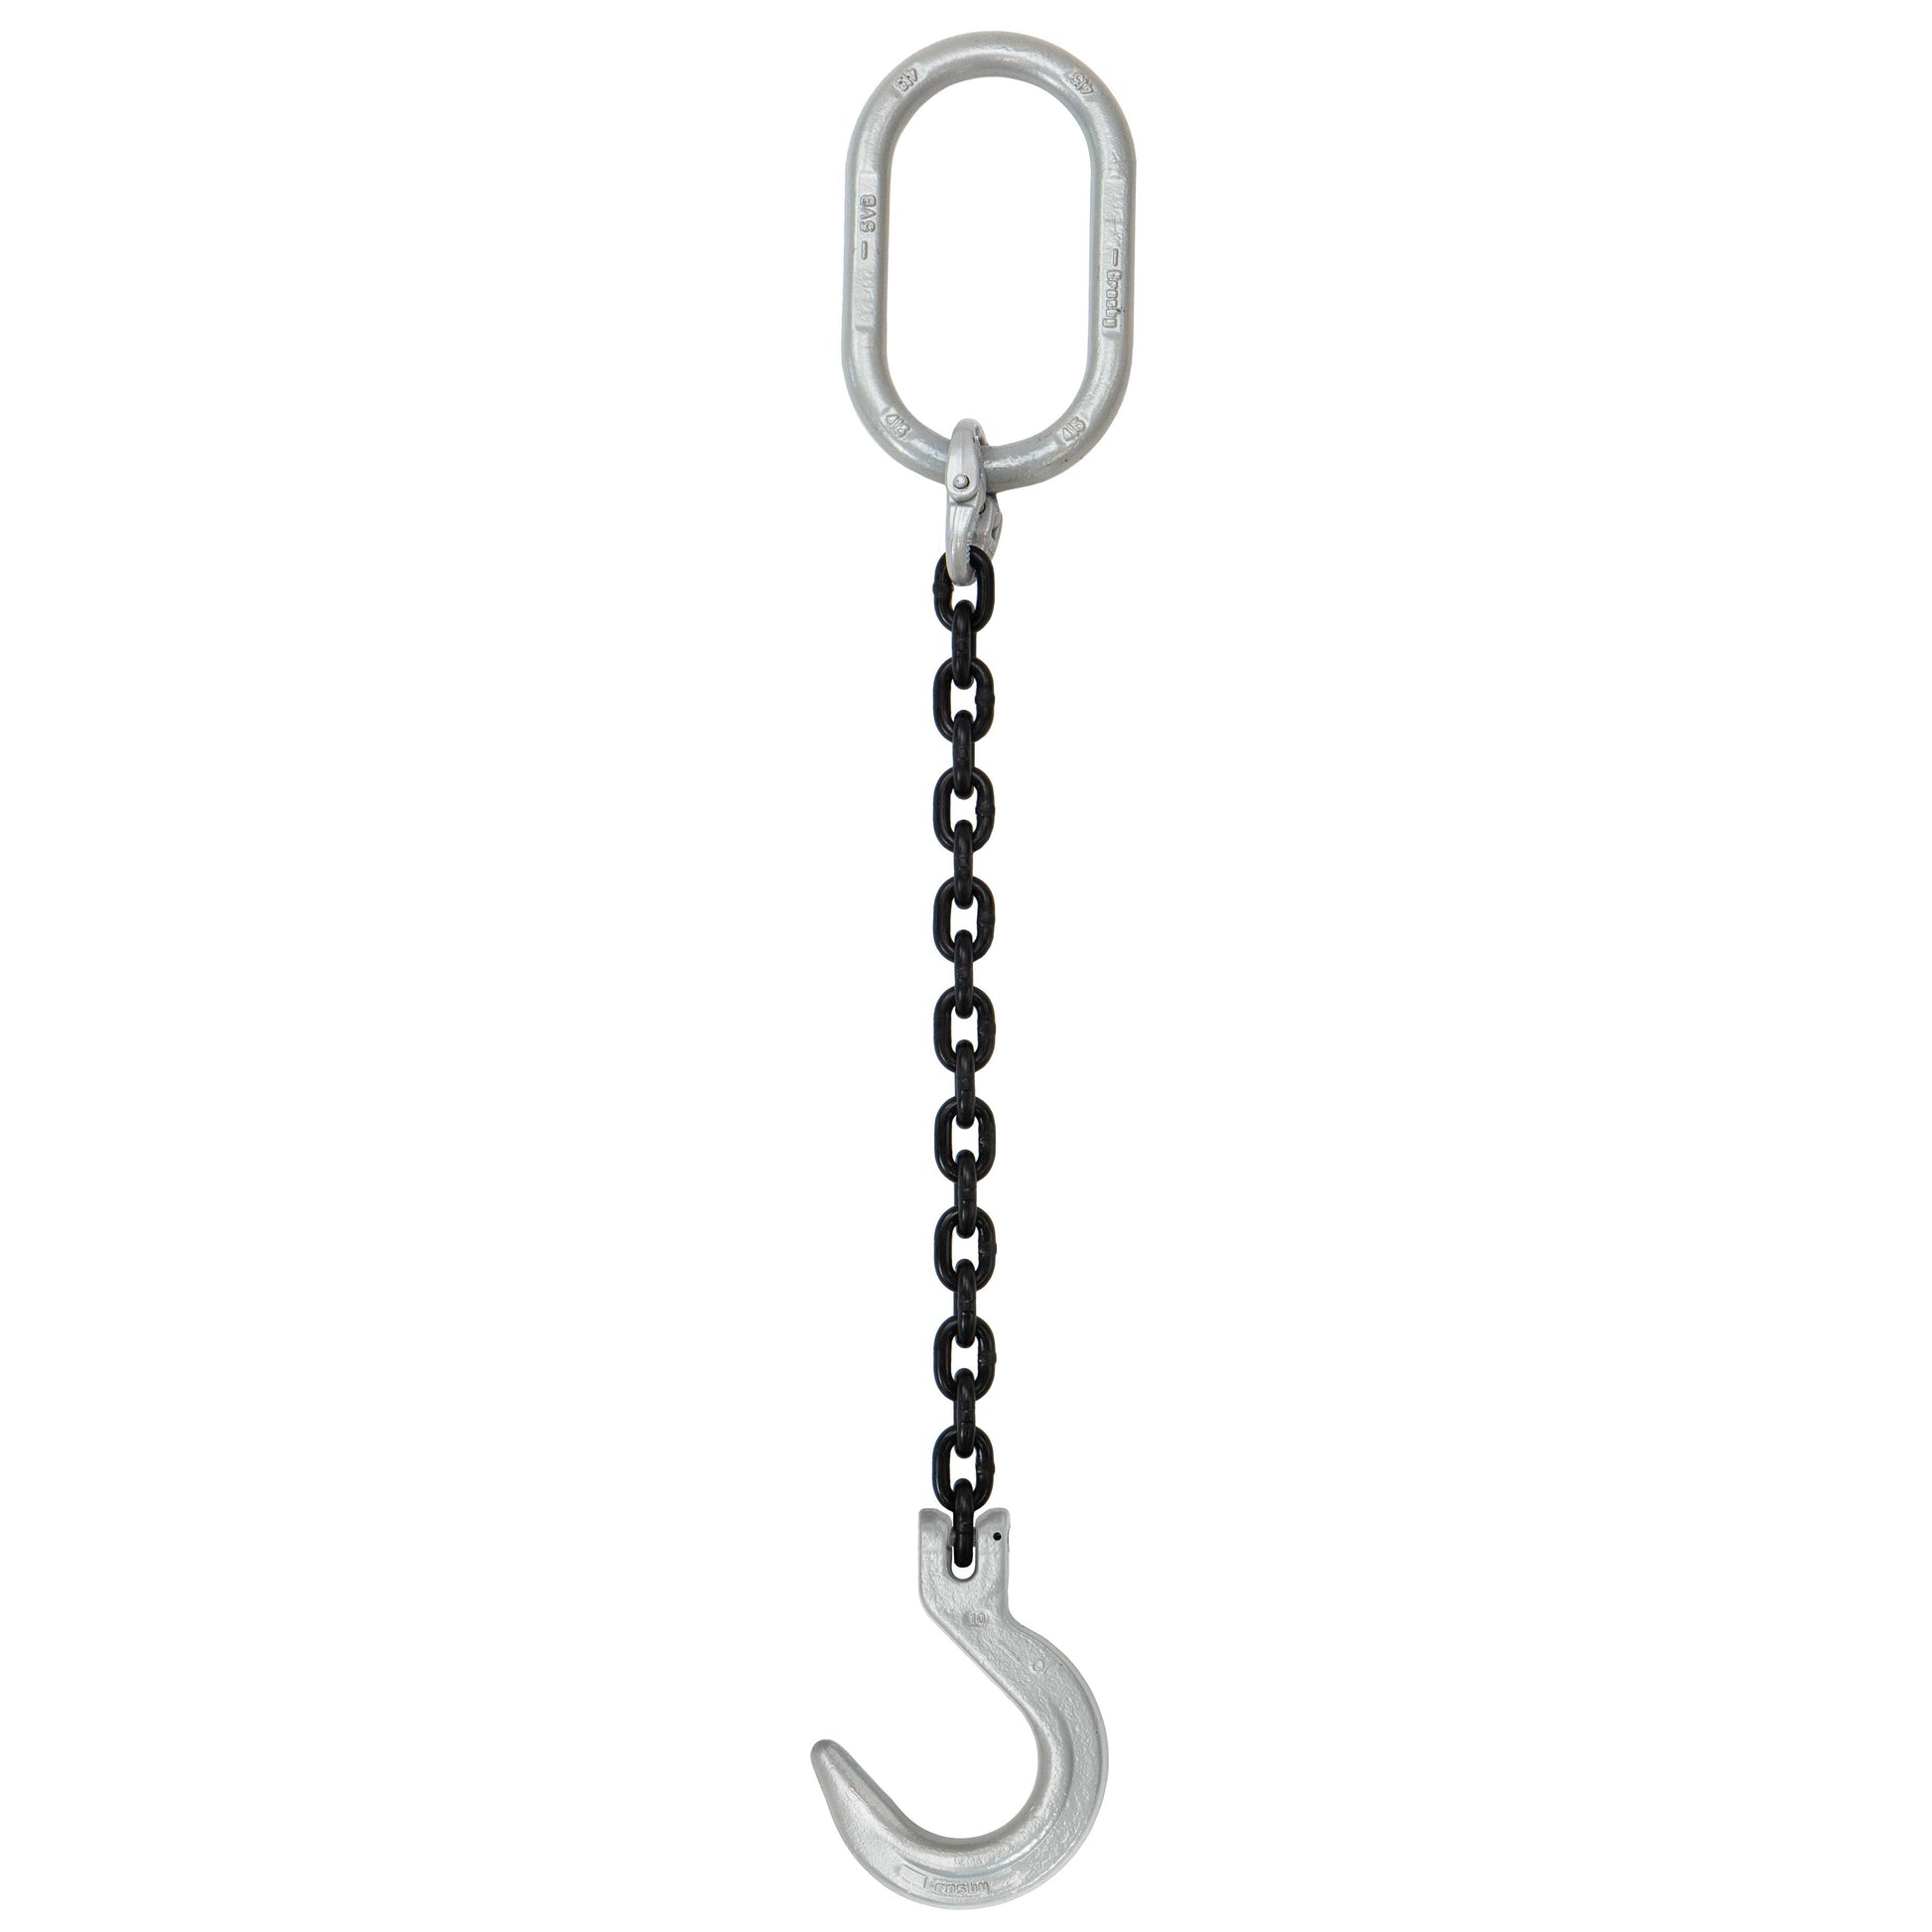 38 inch x 18 foot Domestic Single Leg Chain Sling w Crosby Foundry Hook Grade 100 image 1 of 2